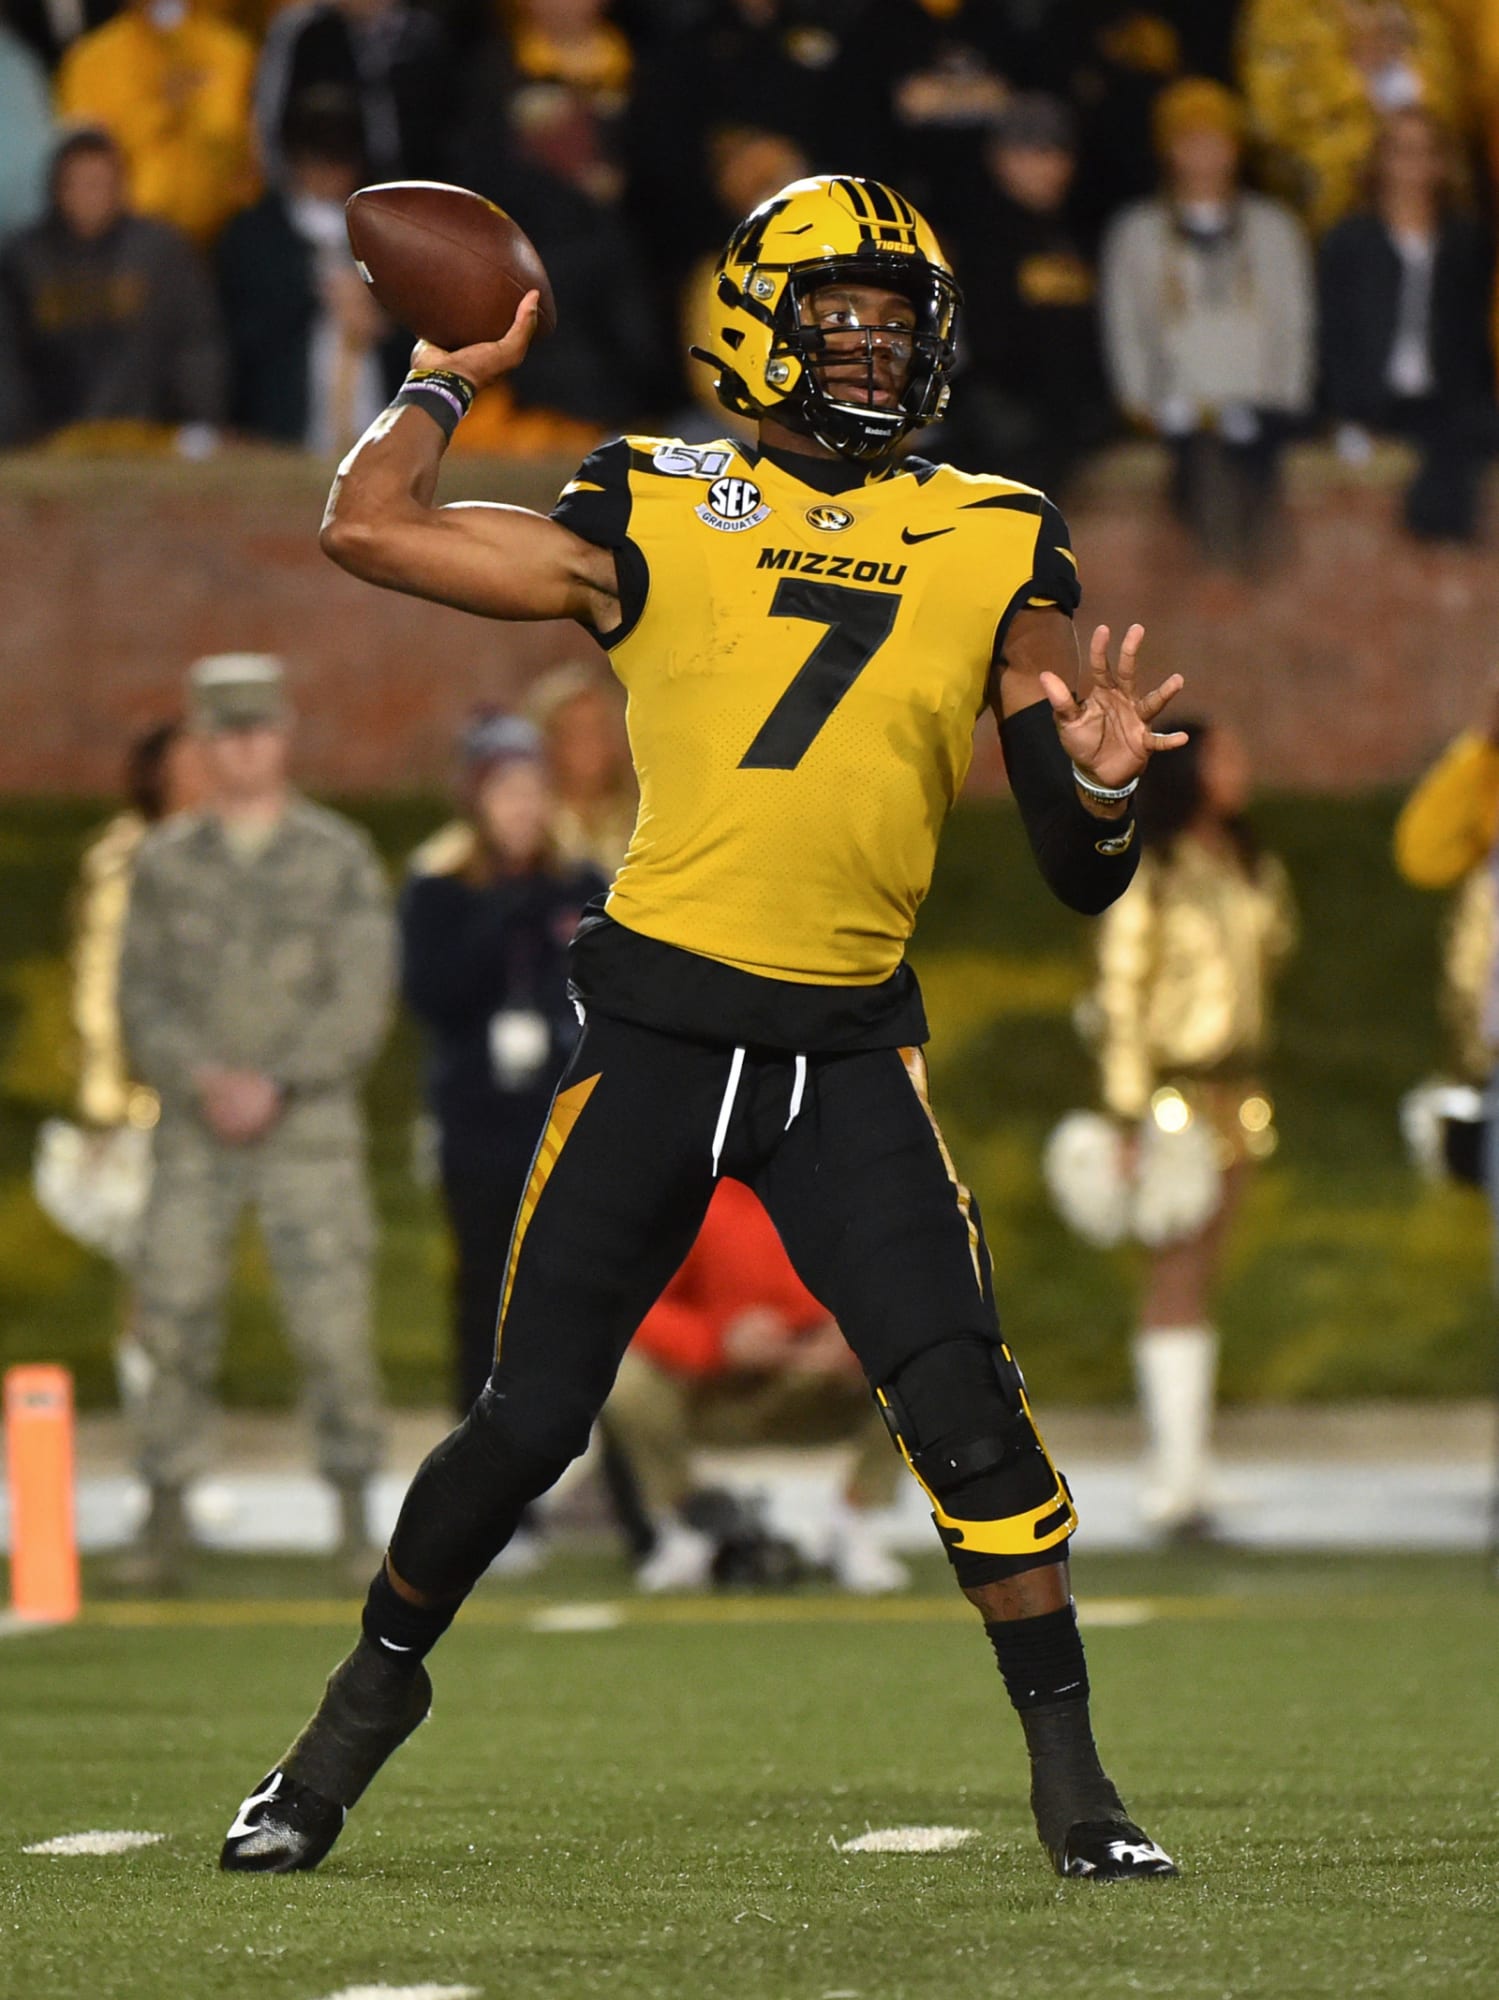 Mizzou football Vanderbilt game is an opportunity to make a statement